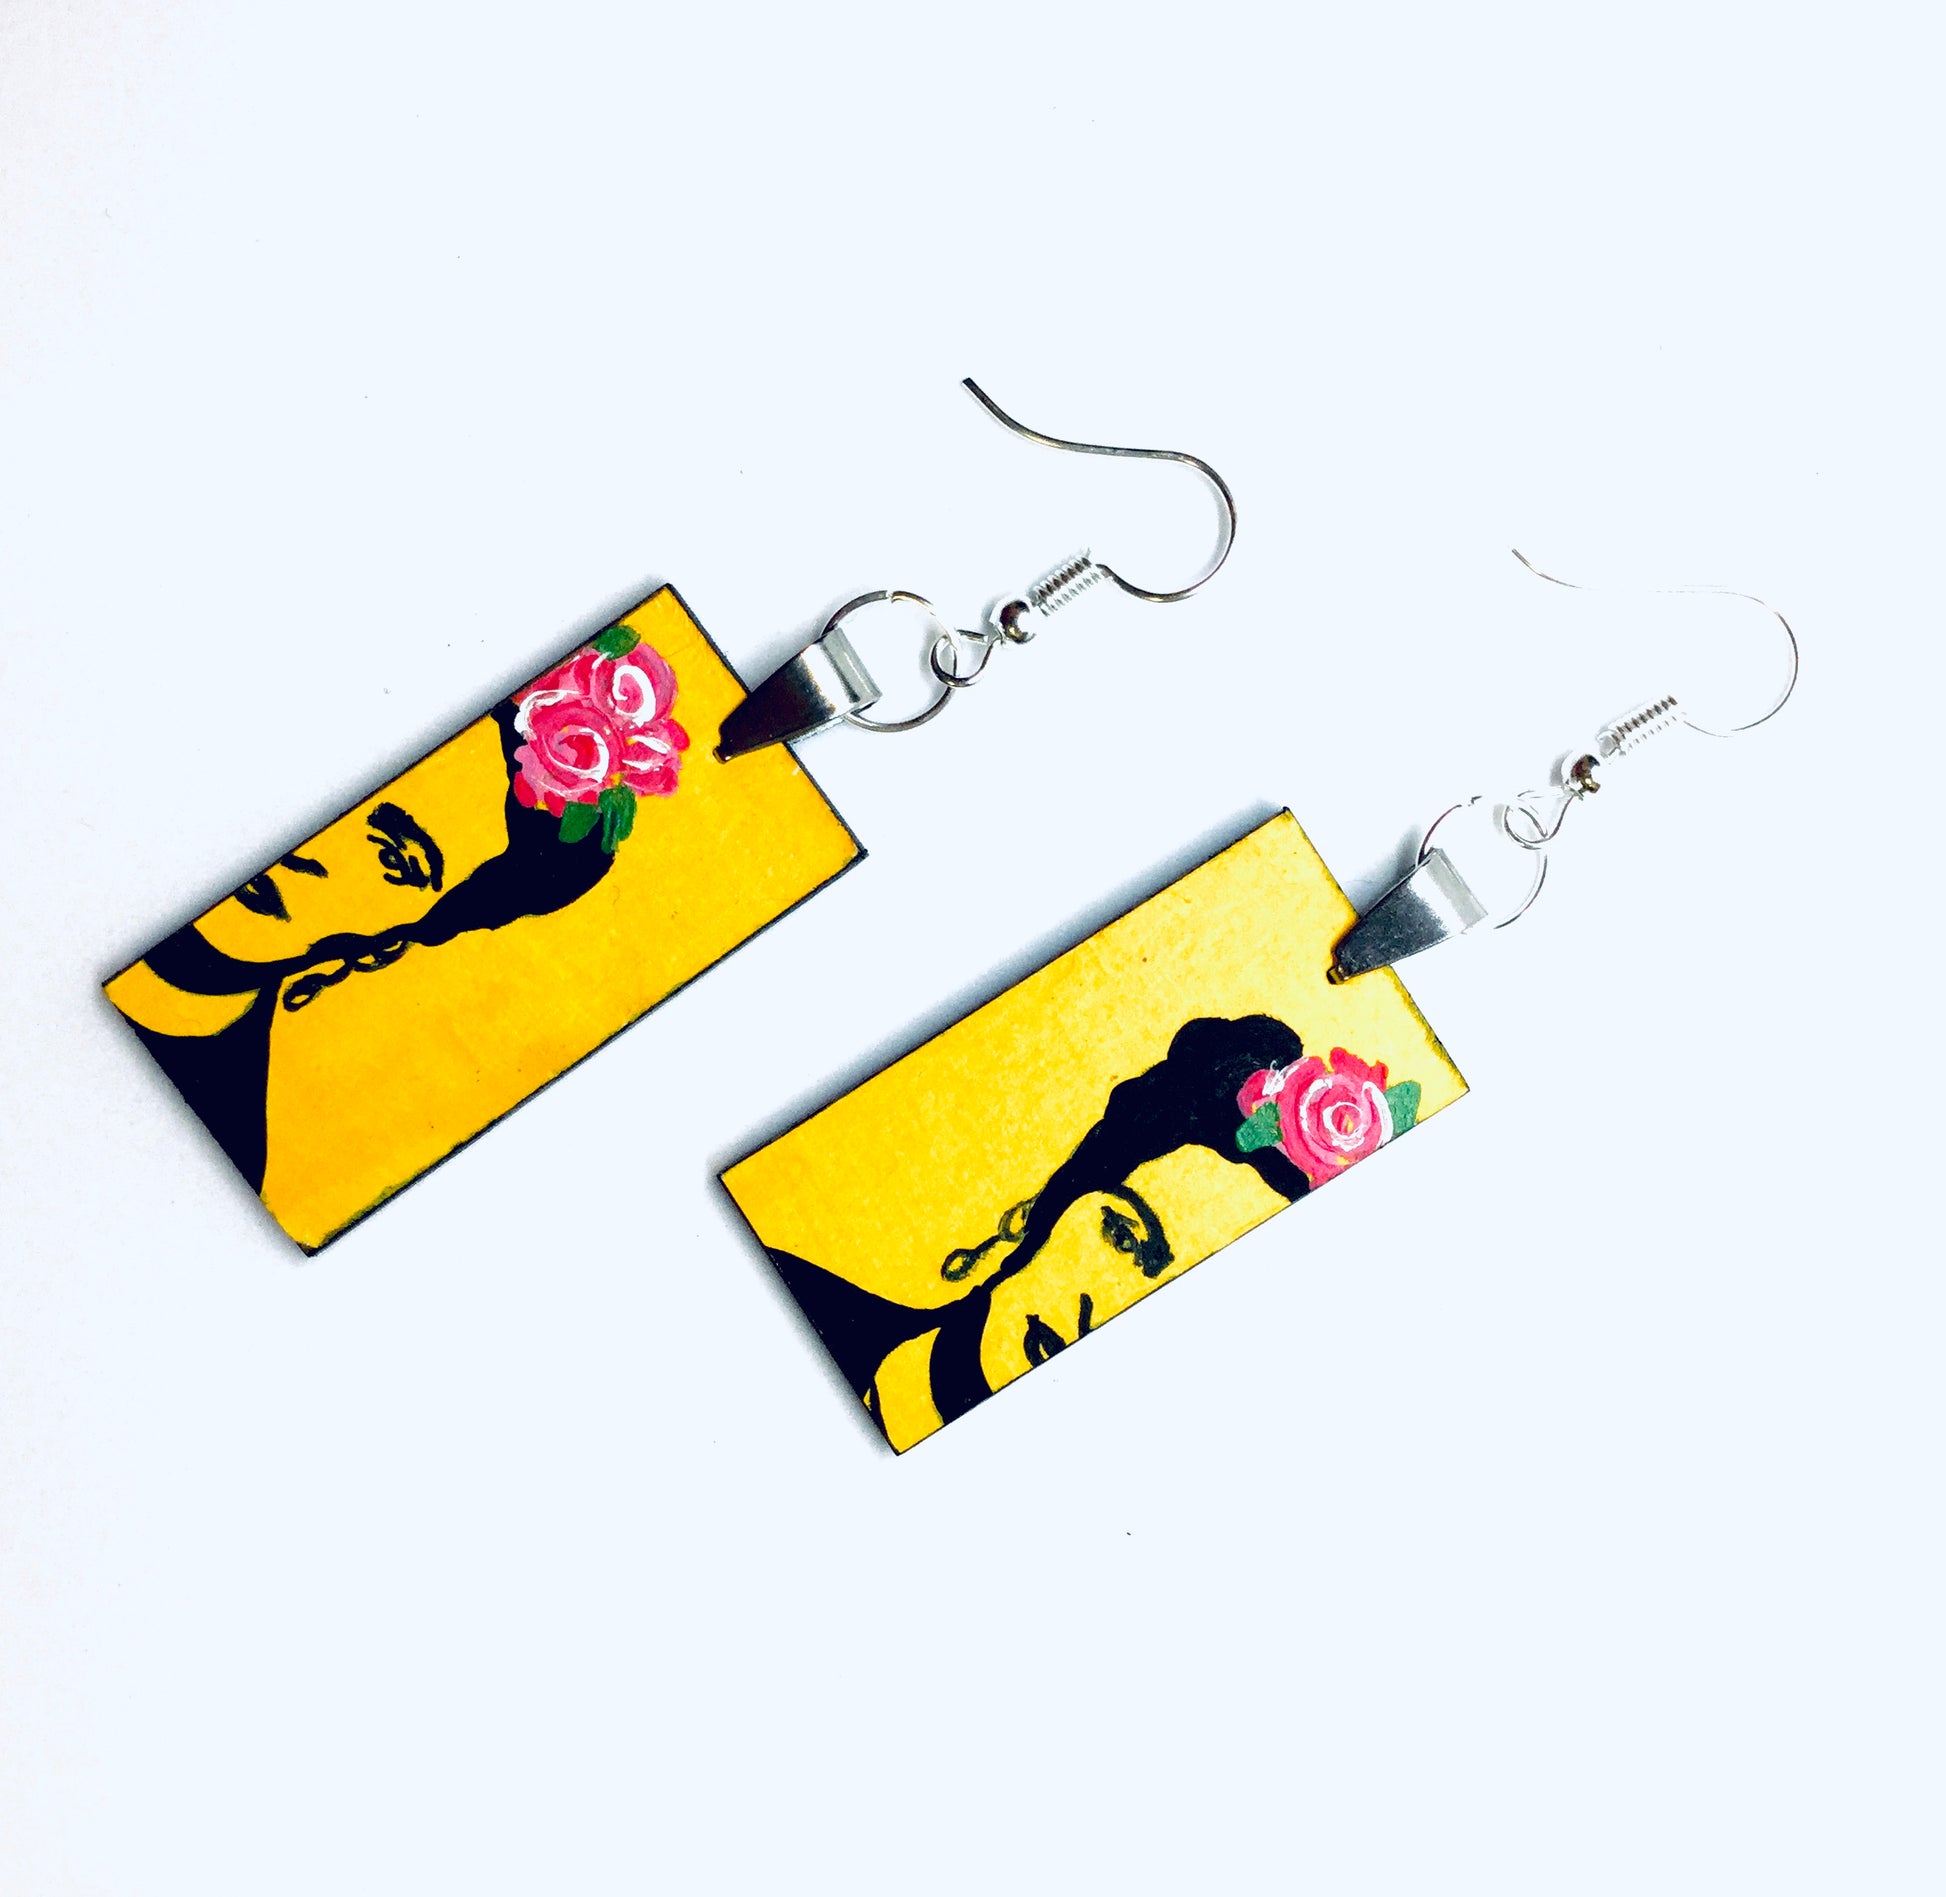 Frida earrings. Frida Kahlo hand painted earrings. Stencil art and pink roses. Wearable Art. Fridamaniacs Mexican jewelry and accessories